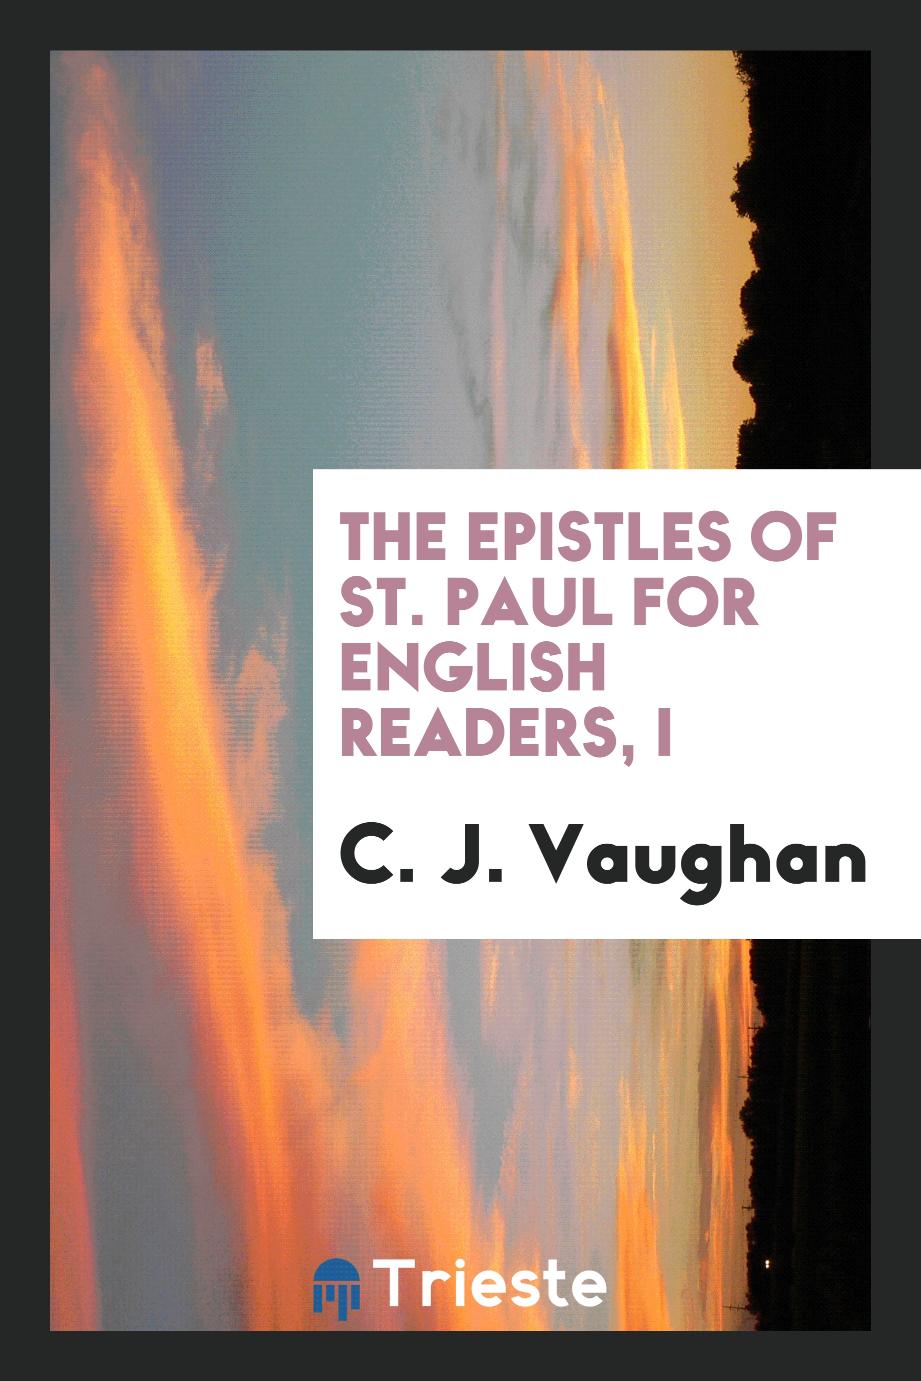 The Epistles of St. Paul for English Readers, I